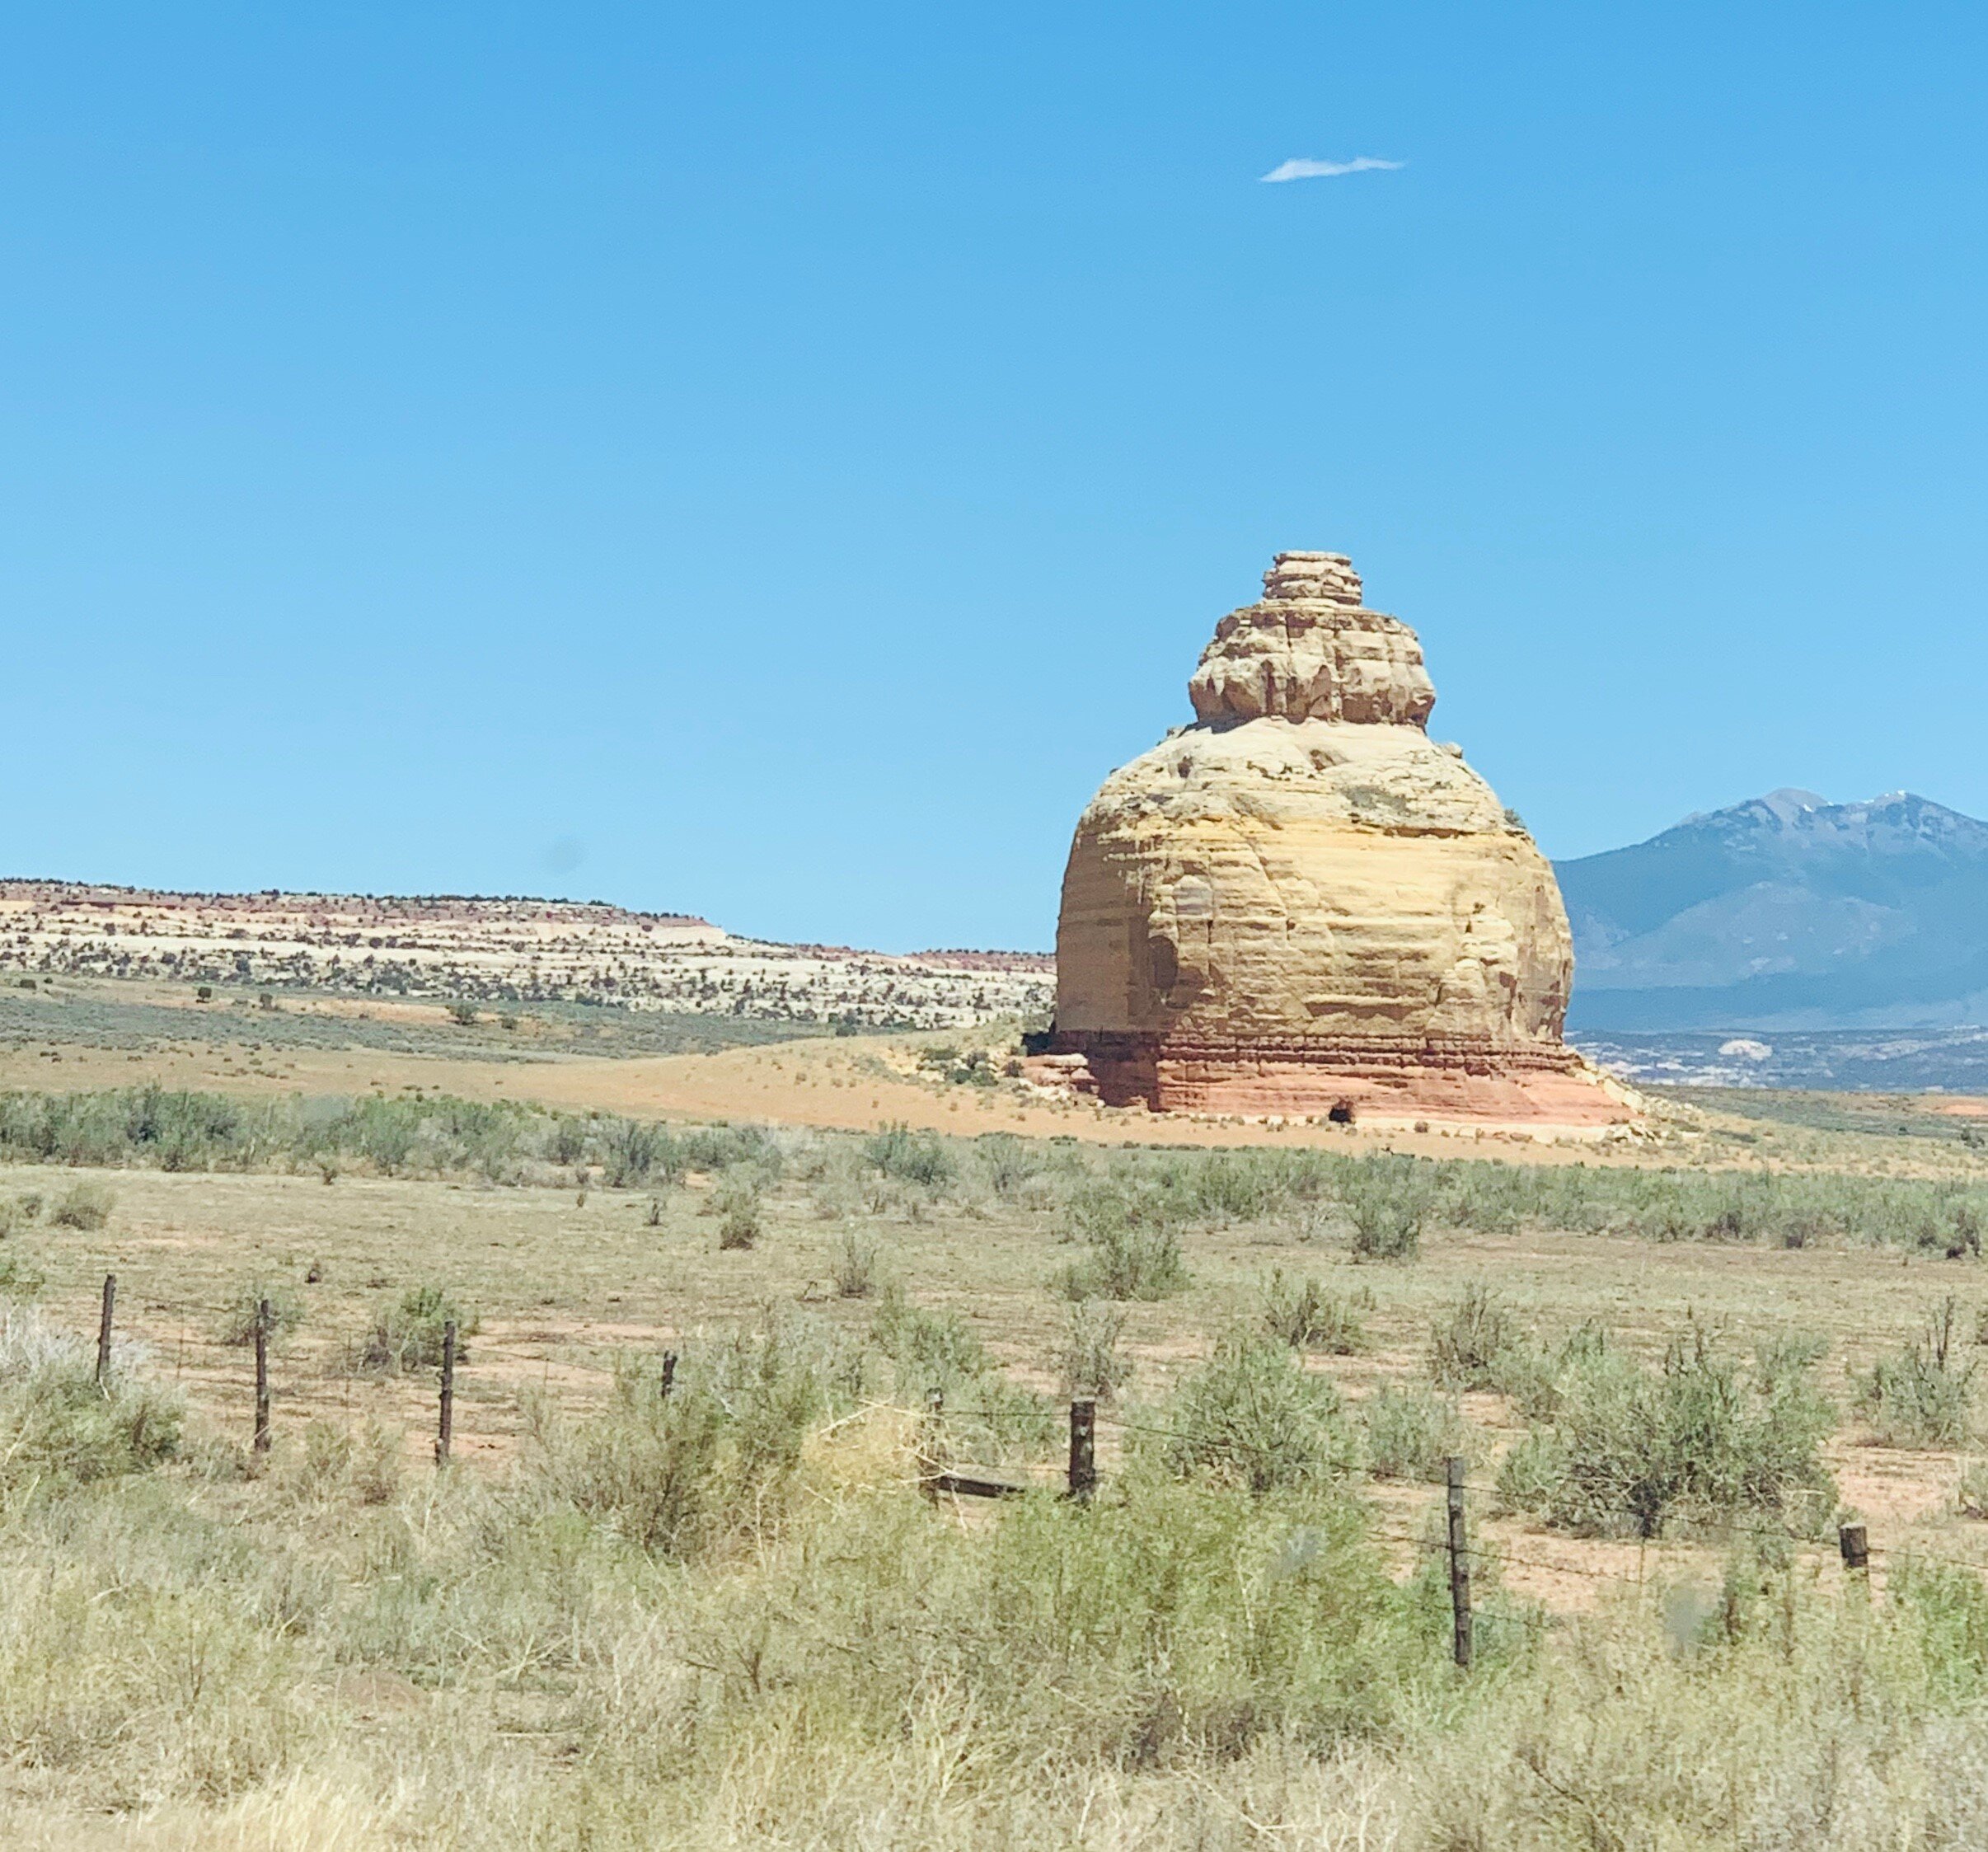  On the way to Moab, UT, we spotted this lone rock near Monticello. As it is named,  Church Rock  carries rumors of getting its name from a zealous religious woman with a colorful history, who came into the area in the 1930s and wanted the rock made 